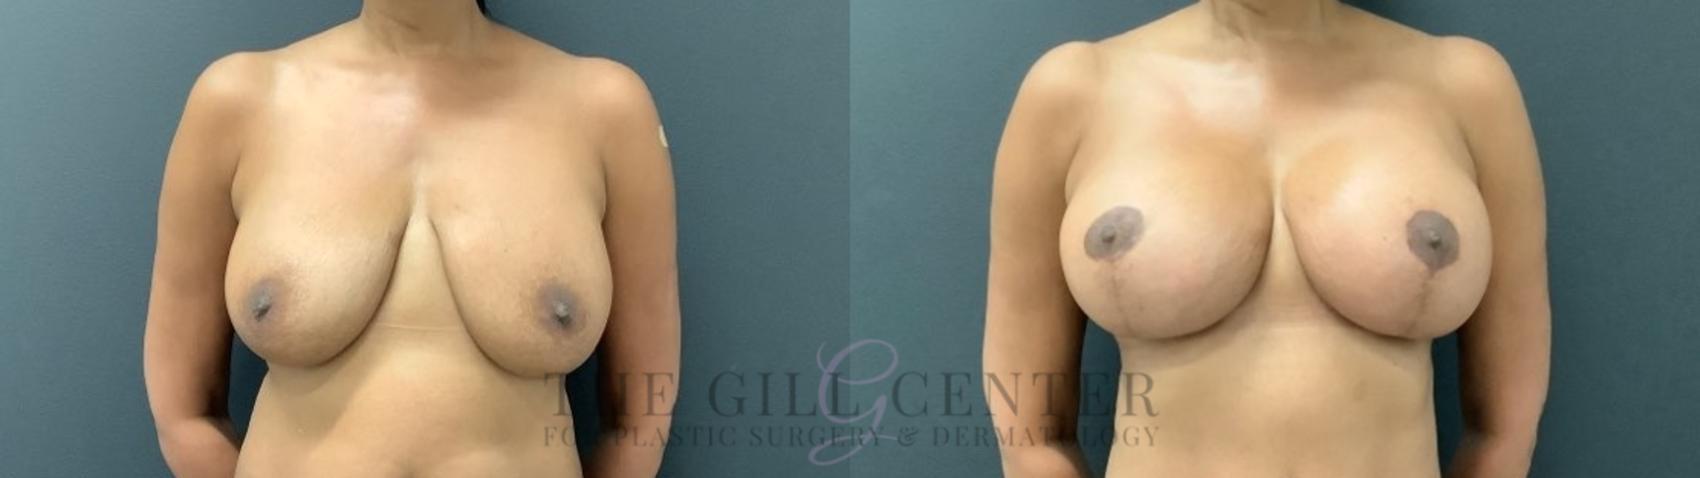 Breast Lift with Implants Case 544 Before & After Front | The Woodlands, TX | The Gill Center for Plastic Surgery and Dermatology